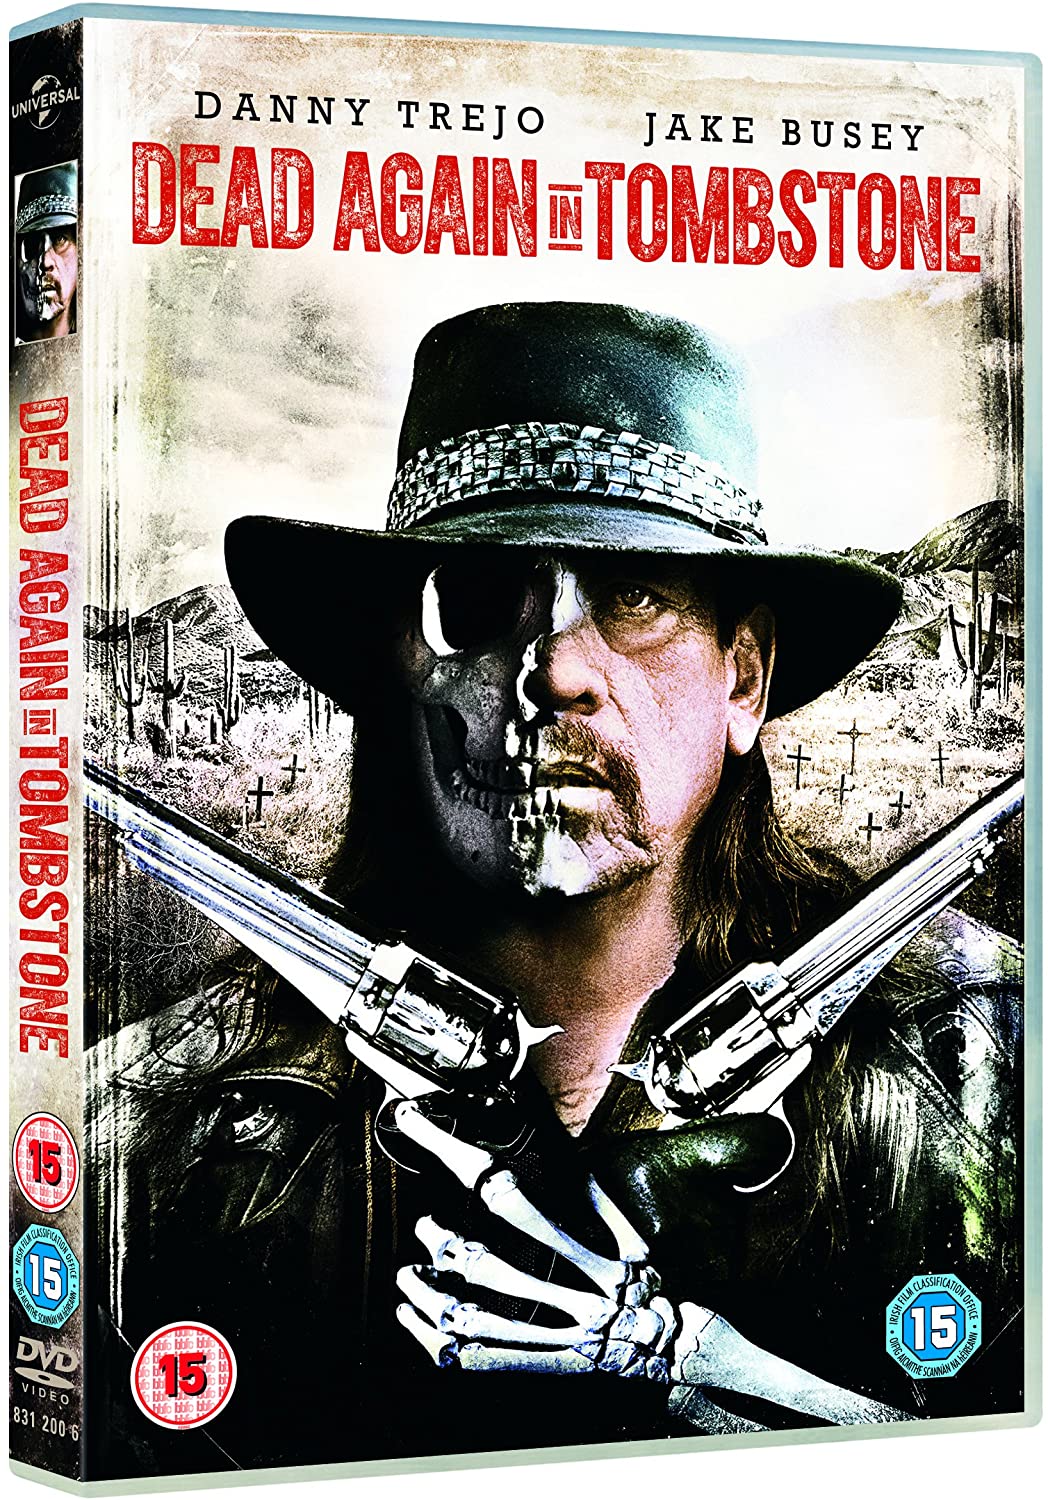 Dead Again in Tombstone - Action [DVD]